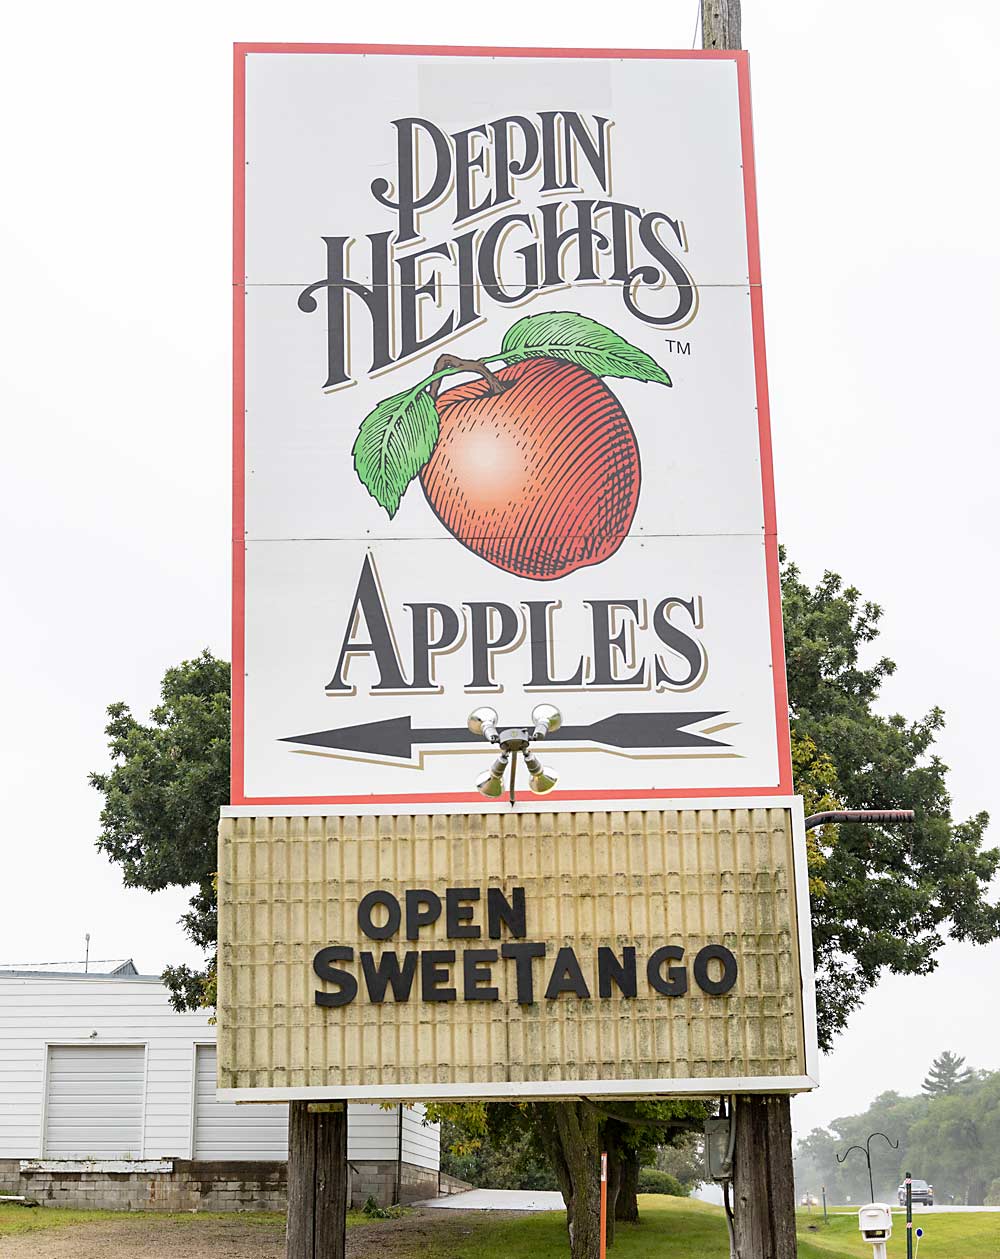 SweeTango sales are still brisk at the Pepin Heights Store in Lake City, Minnesota, now owned by the Ferguson family. The store was previously owned by Dennis Courtier, who was first granted the exclusive marketing rights to the proprietary variety. (Matt Milkovich/Good Fruit Grower)